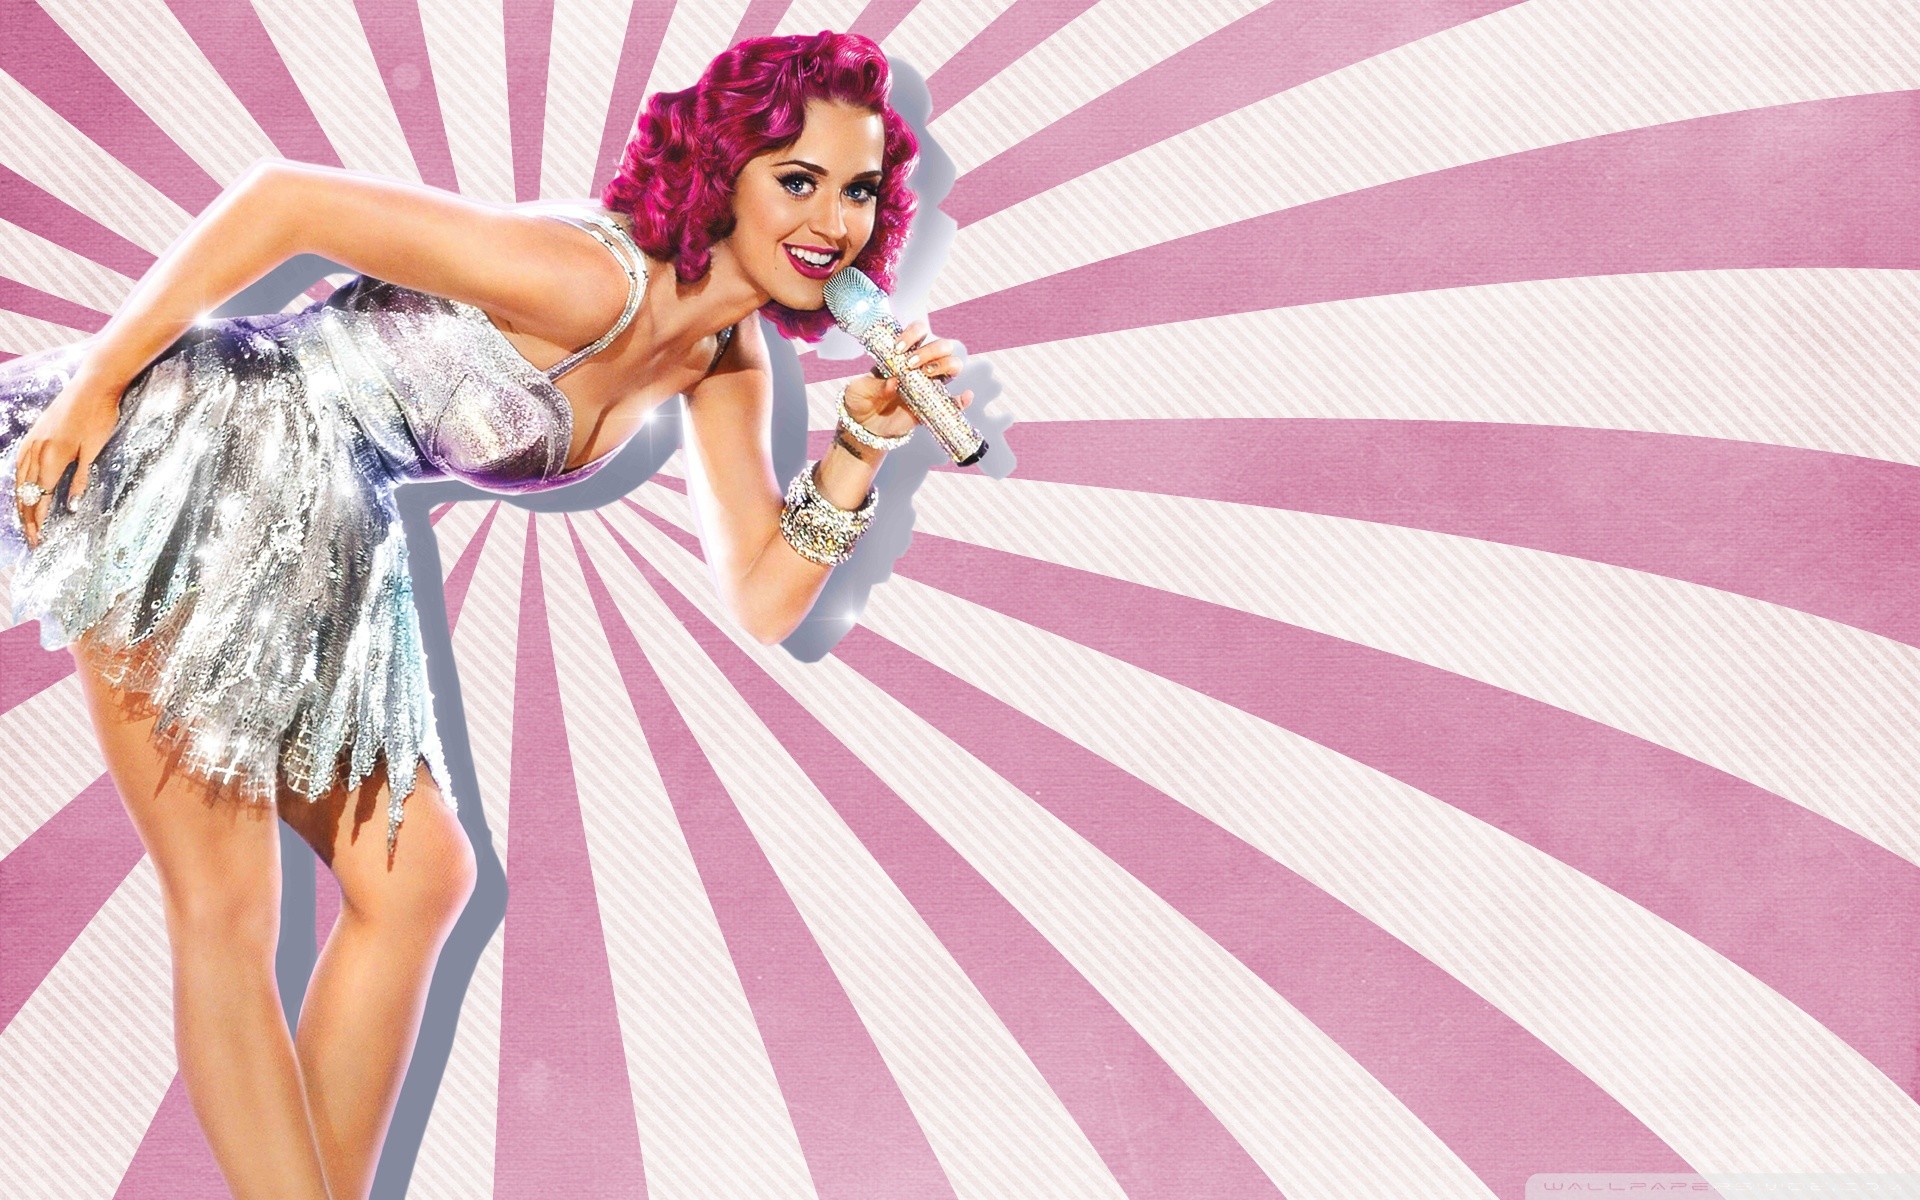 H3rmioneg Images Katy Perry Hd Wallpaper And Background - Sims 3 Showtime Katy Perry - HD Wallpaper 